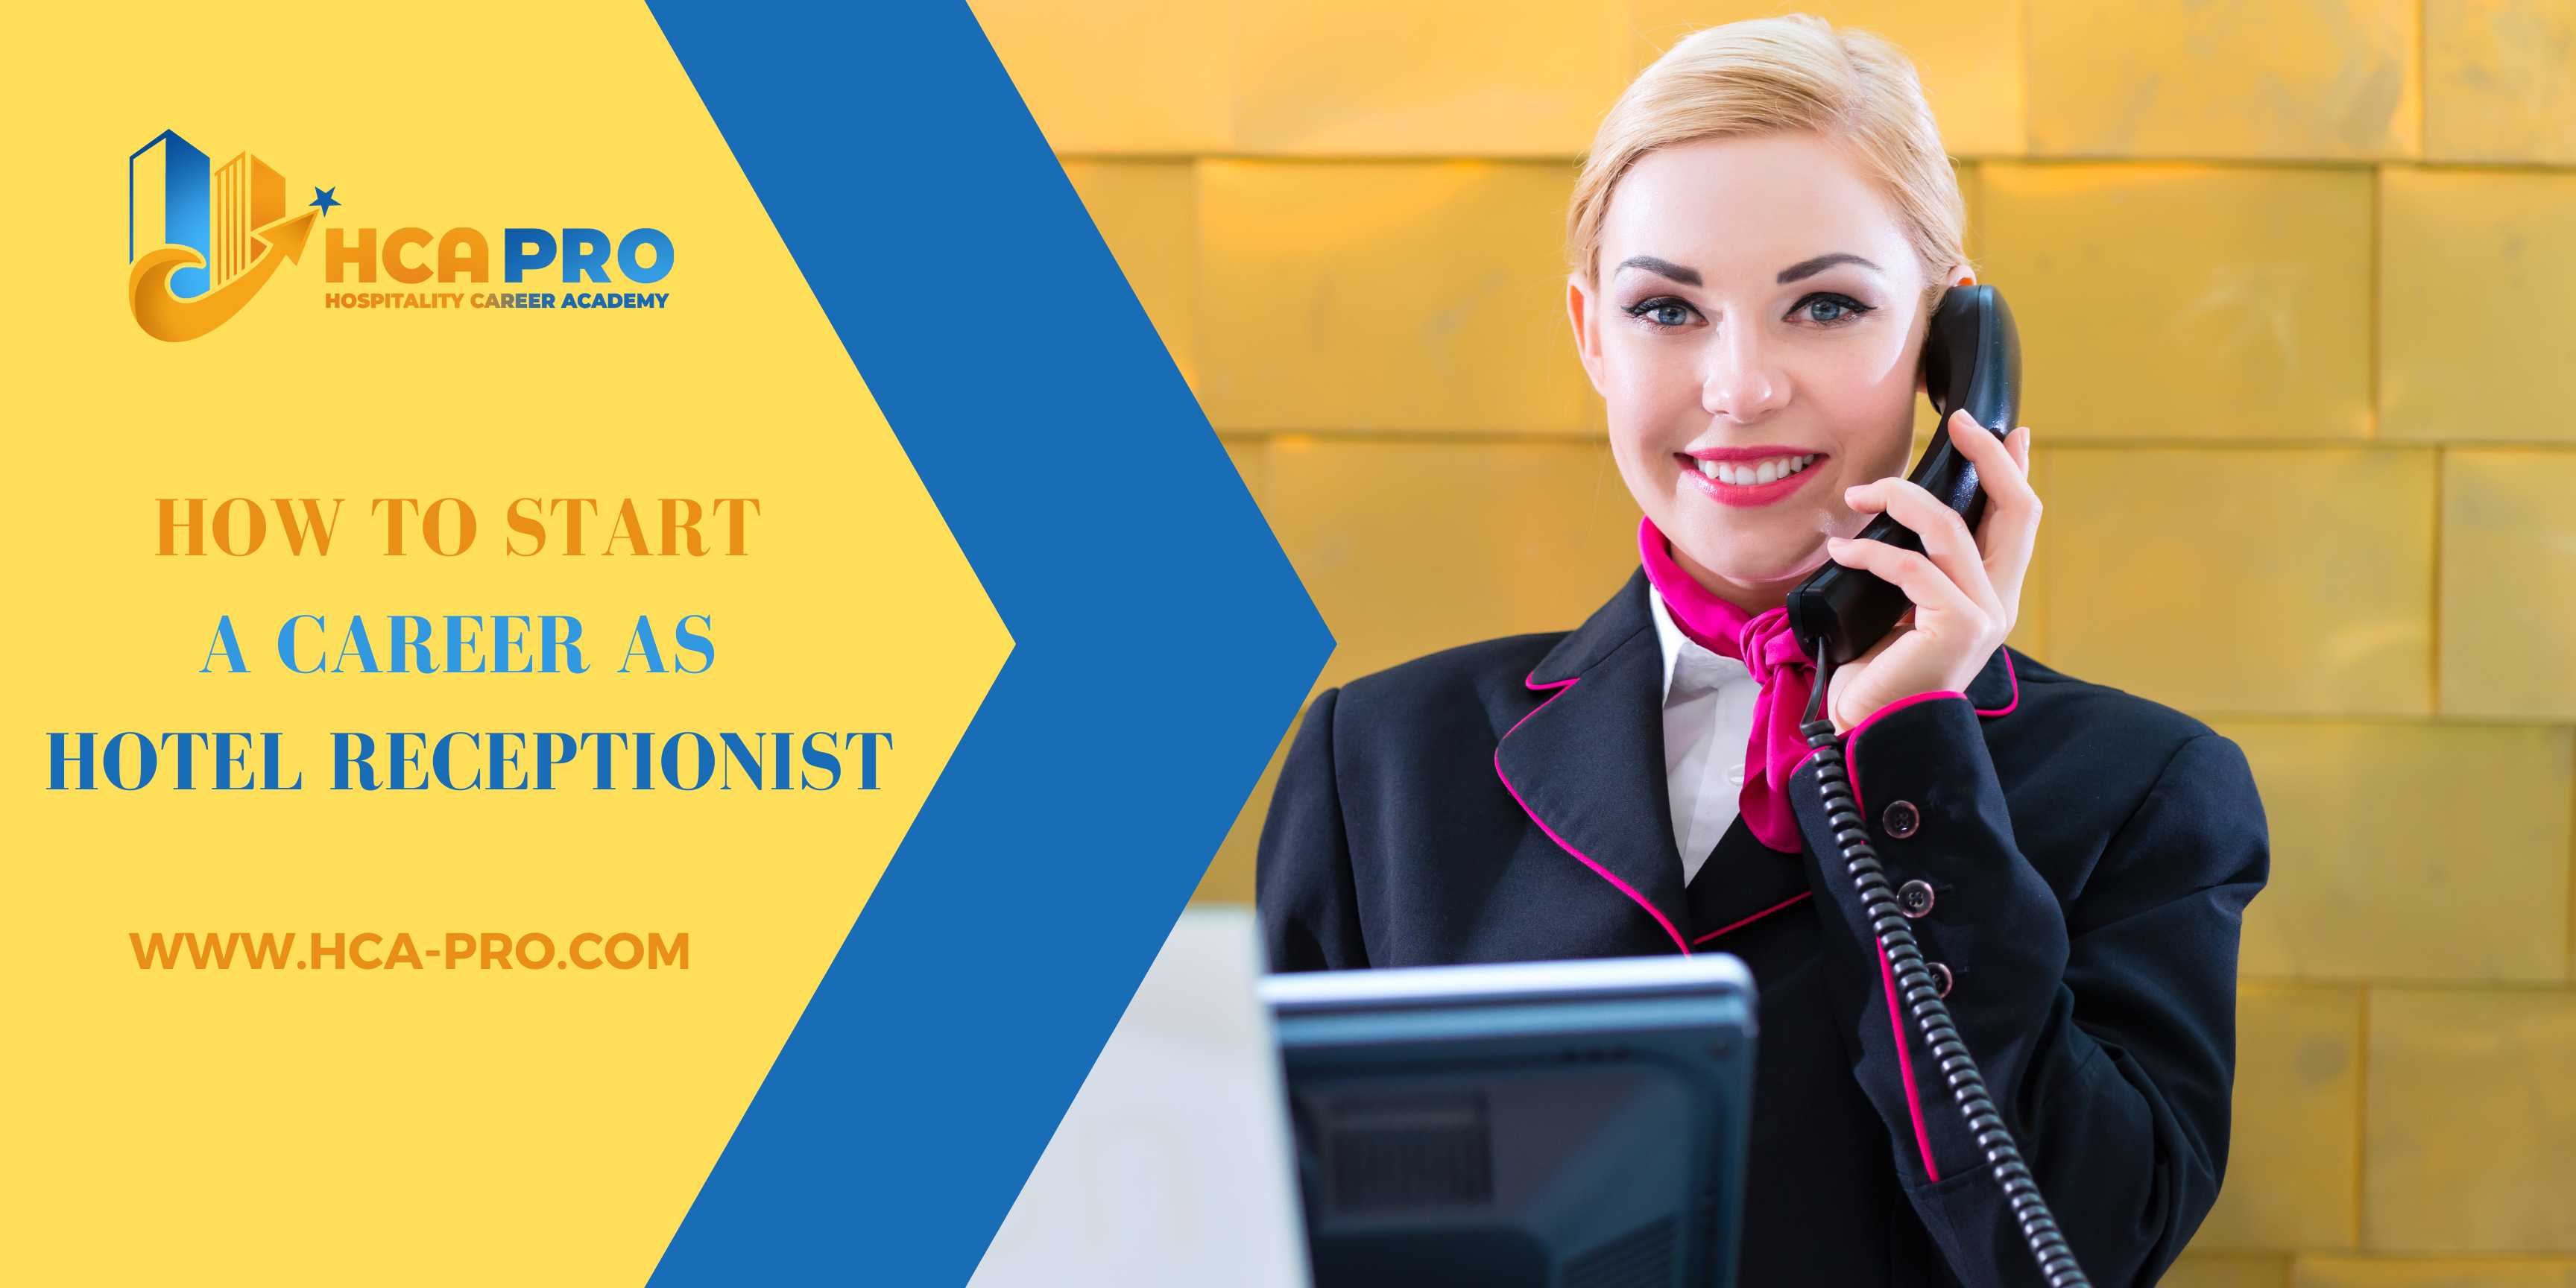 A hotel receptionist is a customer service representative who works at the front desk of a hotel. Their primary responsibilities include checking guests in and out, answering phone calls and emails, taking reservations, and handling guest inquiries and re